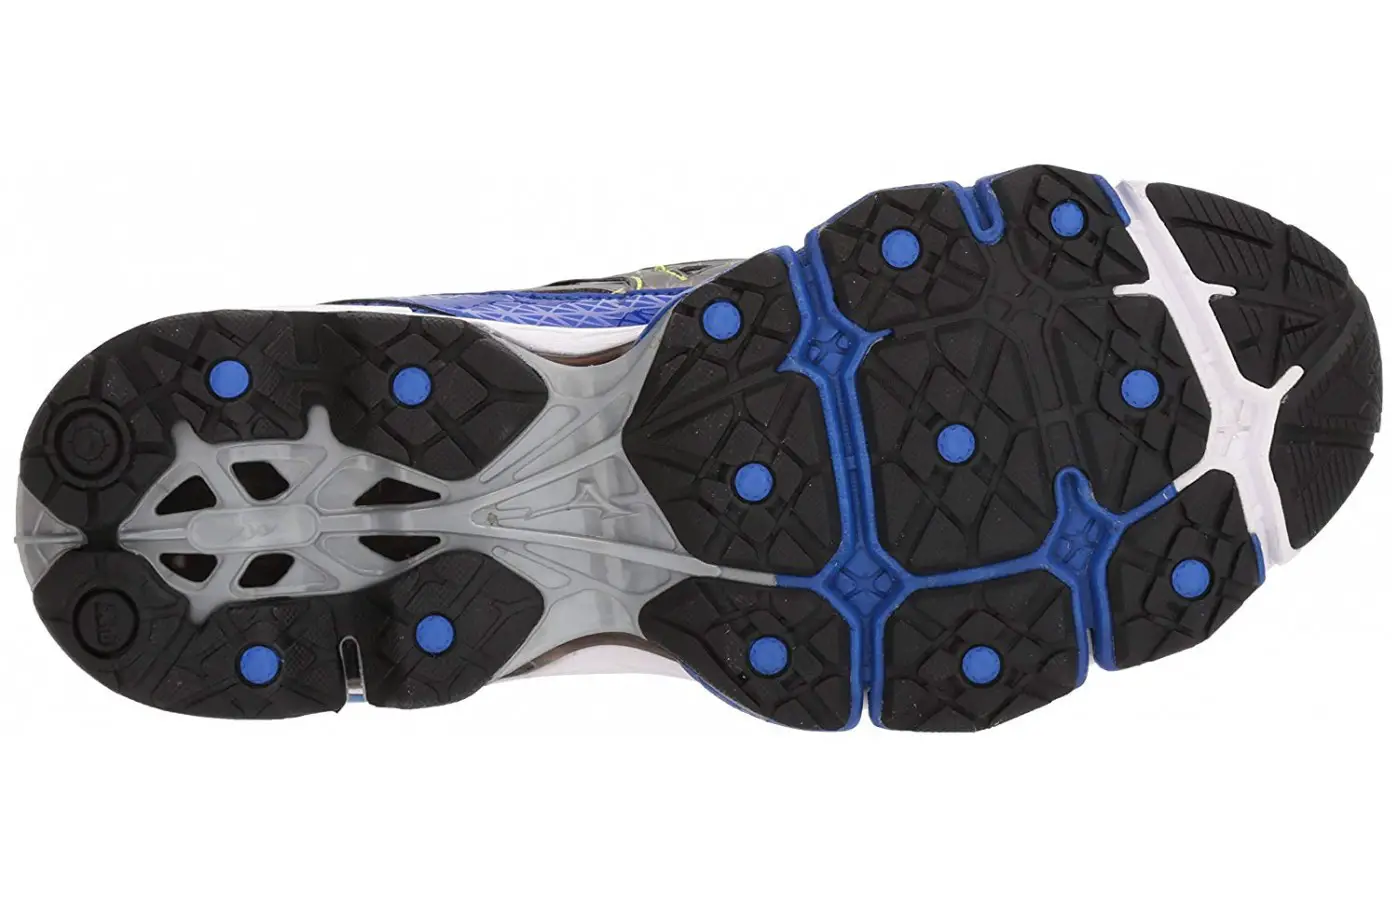 The outsole of the Wave Creation 19 is not smooth, but at first glance of the bottom of the shoe you may mistake it as such. 